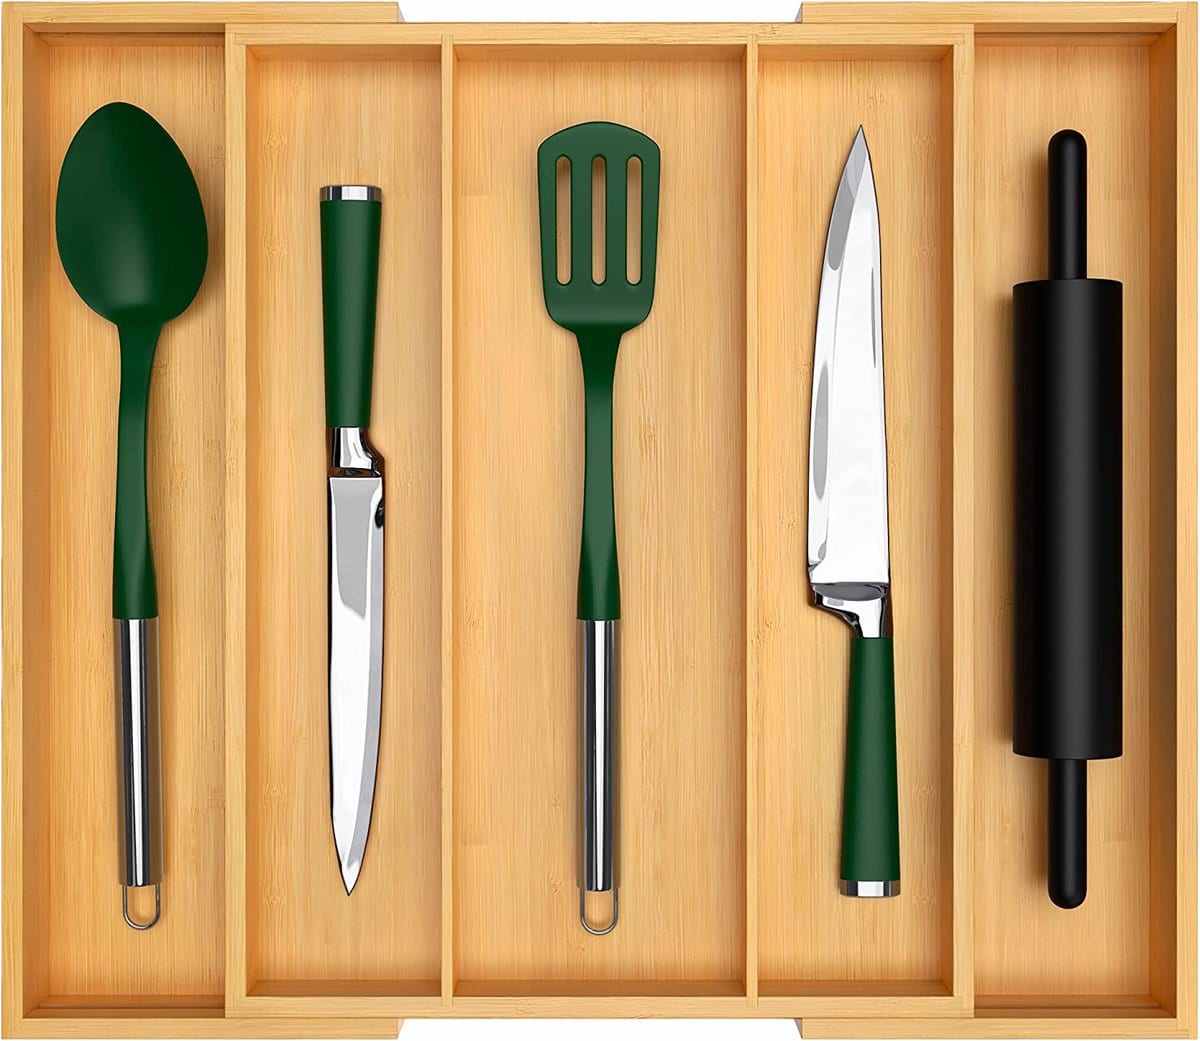 Kitchen Organization Ideas - A bamboo utensil organizer holding knives, a spatula, and a spoon.